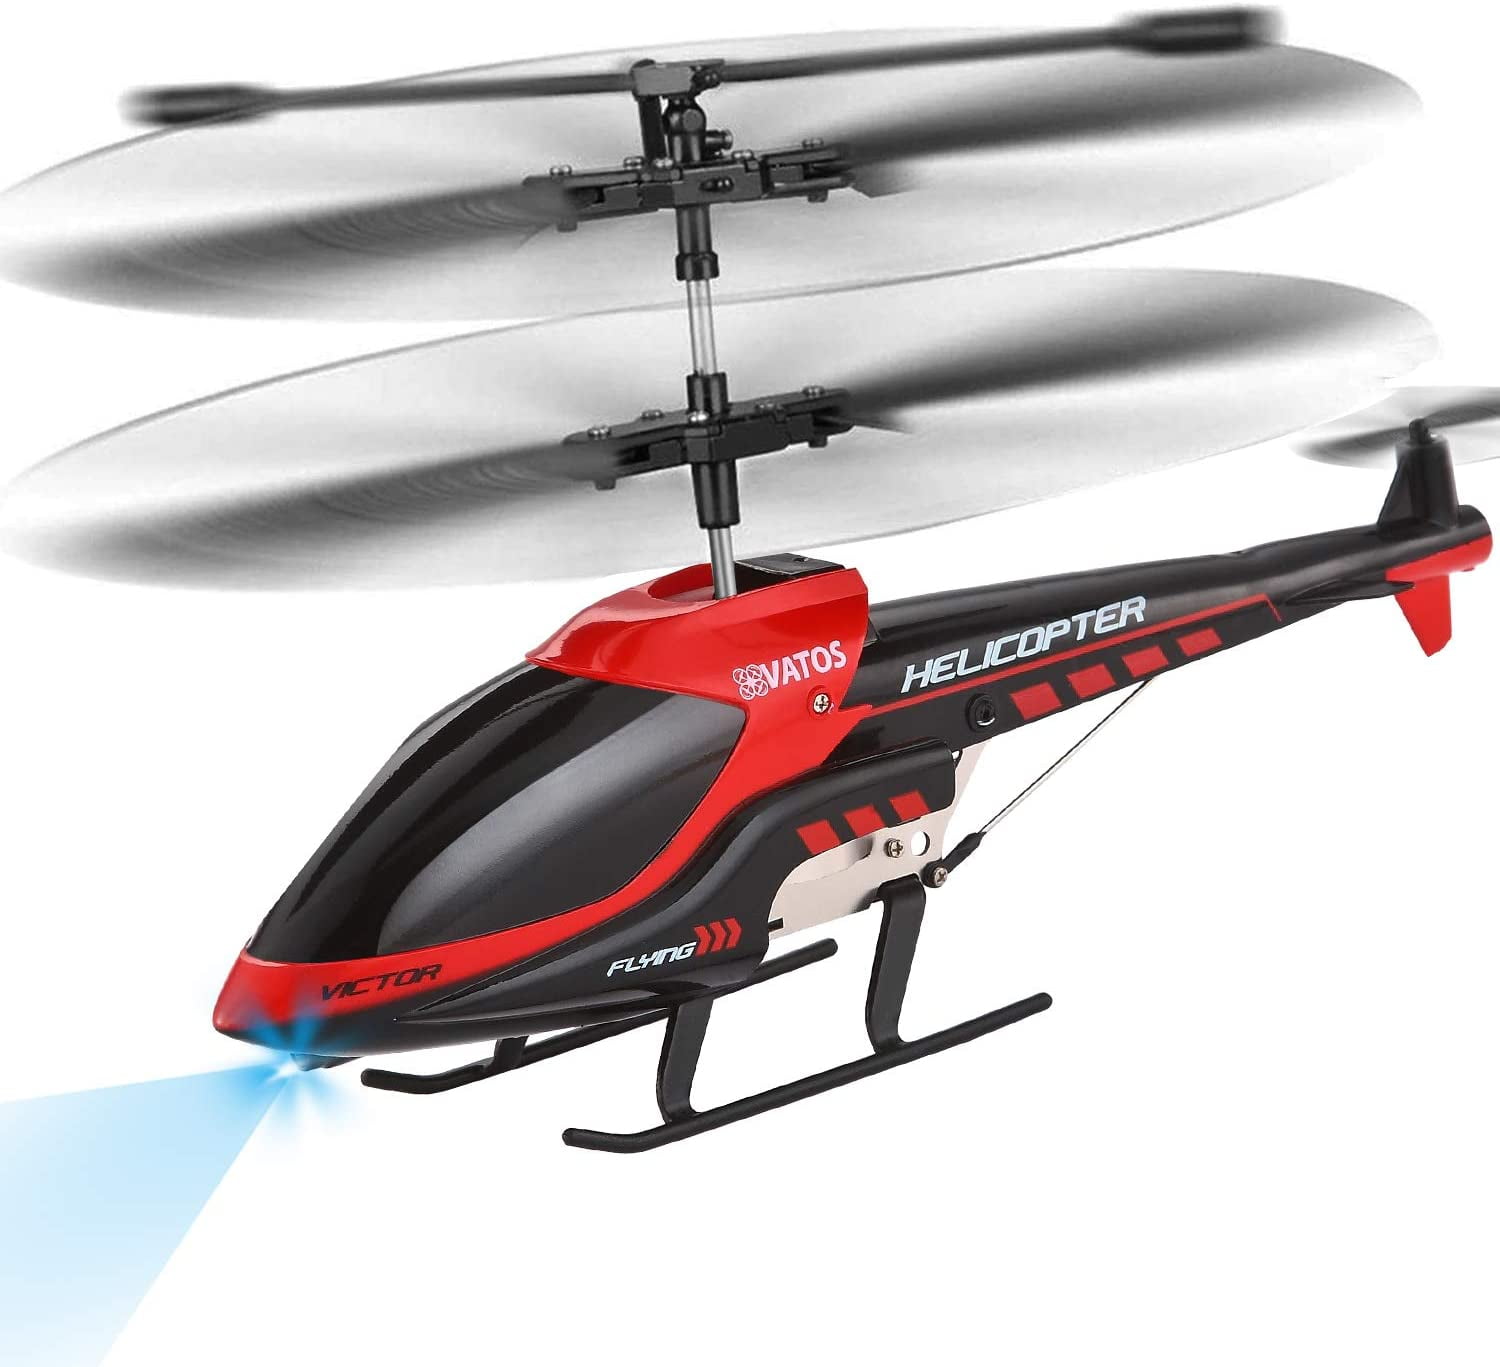 BRAND NEW RC Helicopter 3.5CH Mini Metal Remote Control GYRO Kids Gift RED 